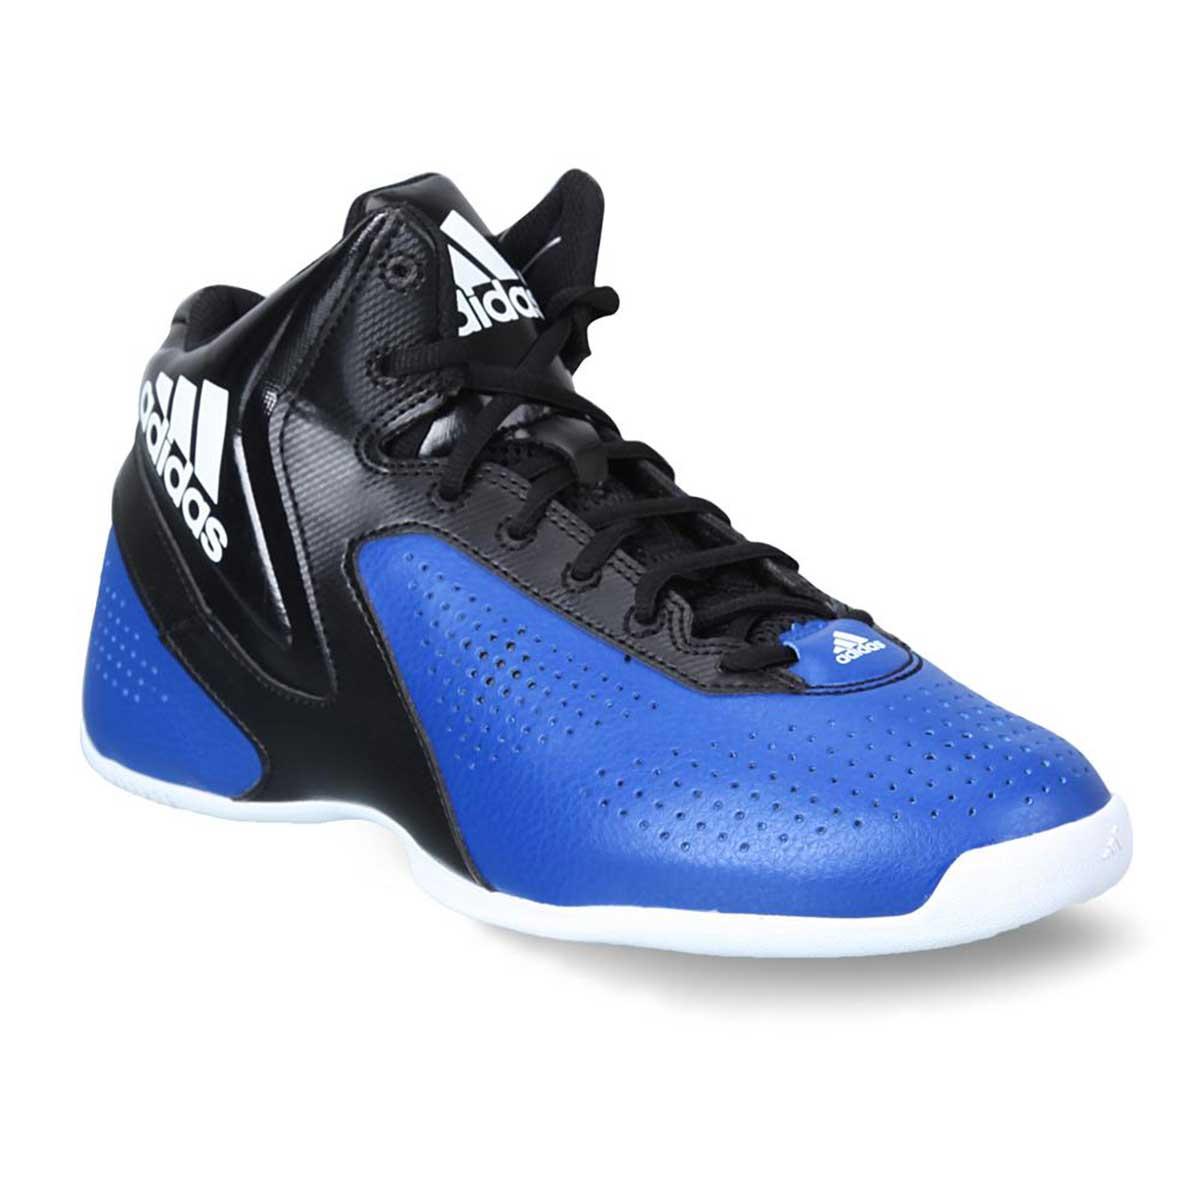 Buy Basketball Shoes Online In India -  India